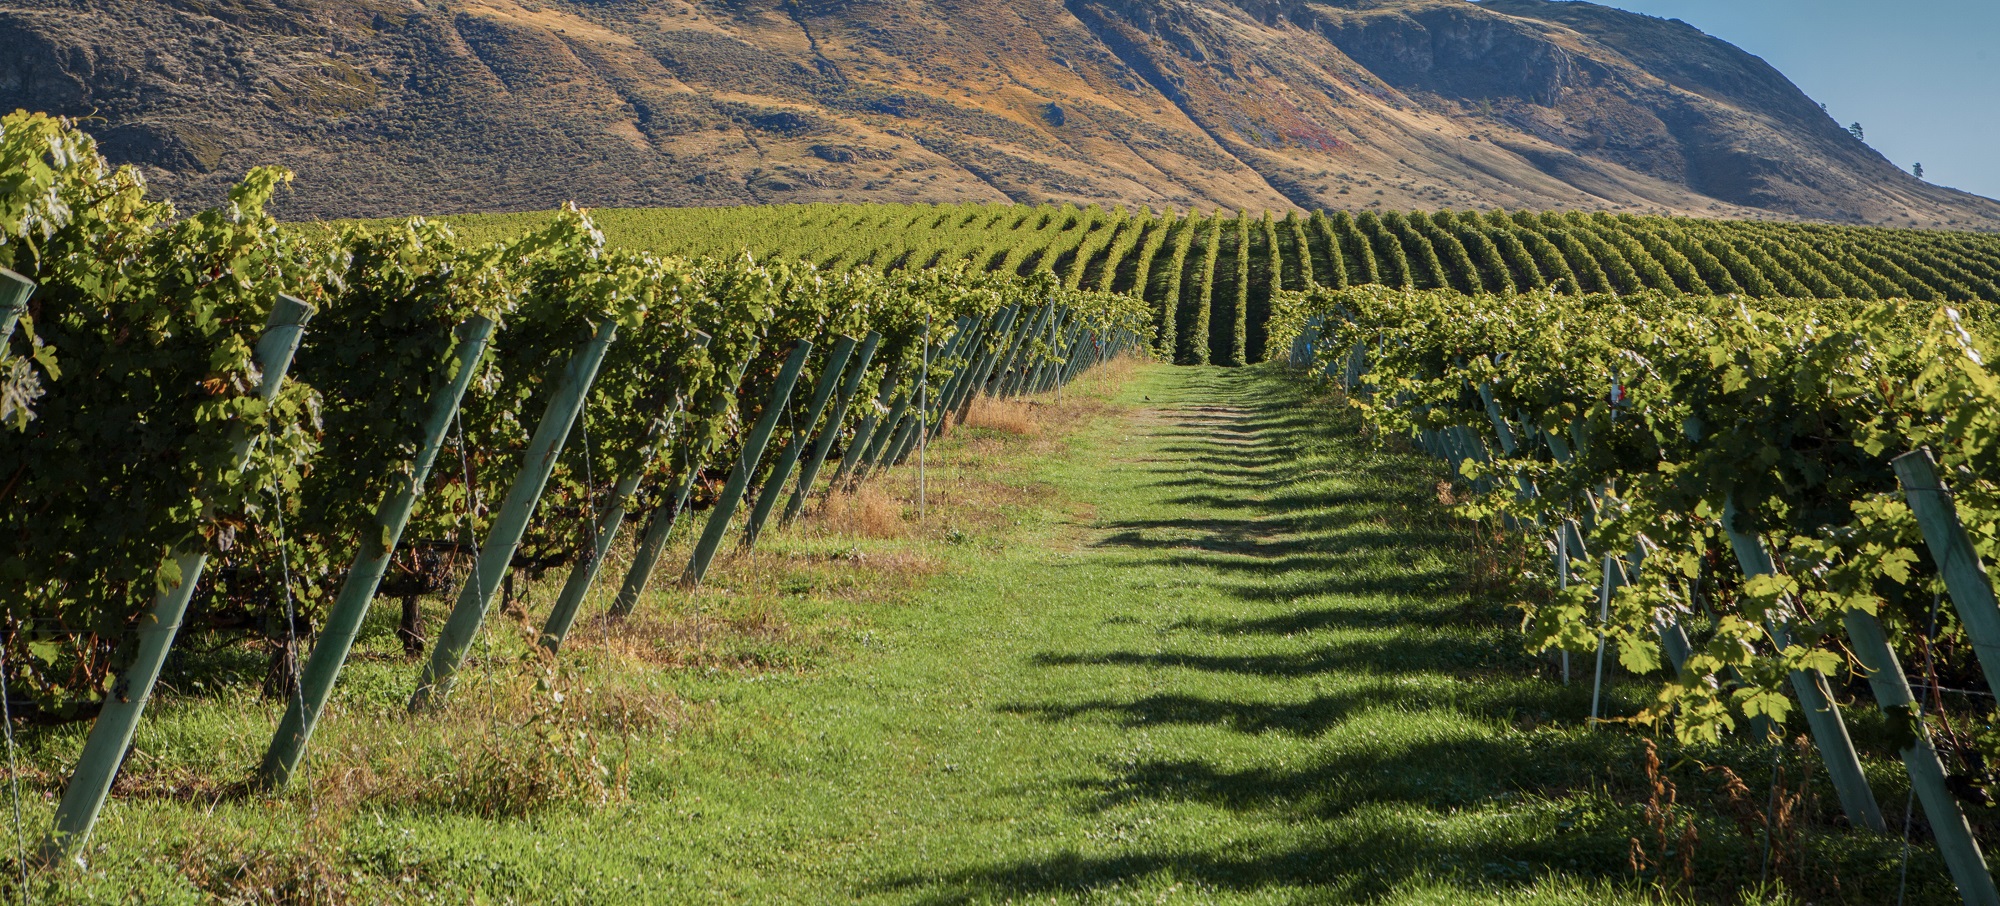 A wide view of the vineyards in Osoyoos.